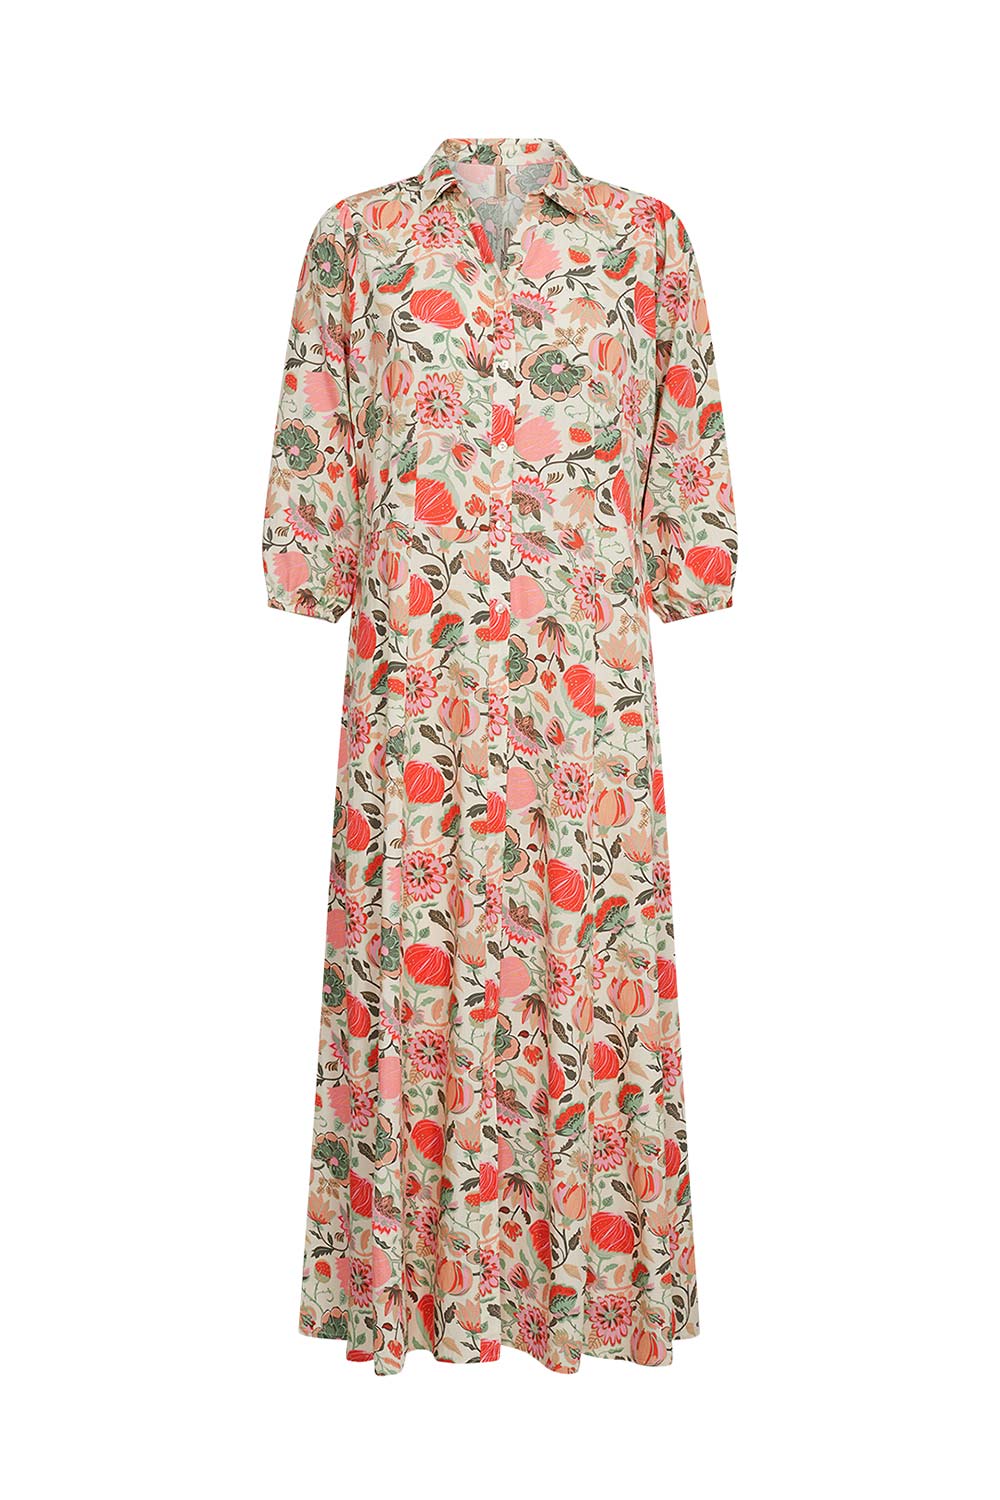 Soya Concept (40580) Women's Graphic Floral 3/4 Sleeve Shirt Midi Dress in Peach, pink and green floral print over a cream background